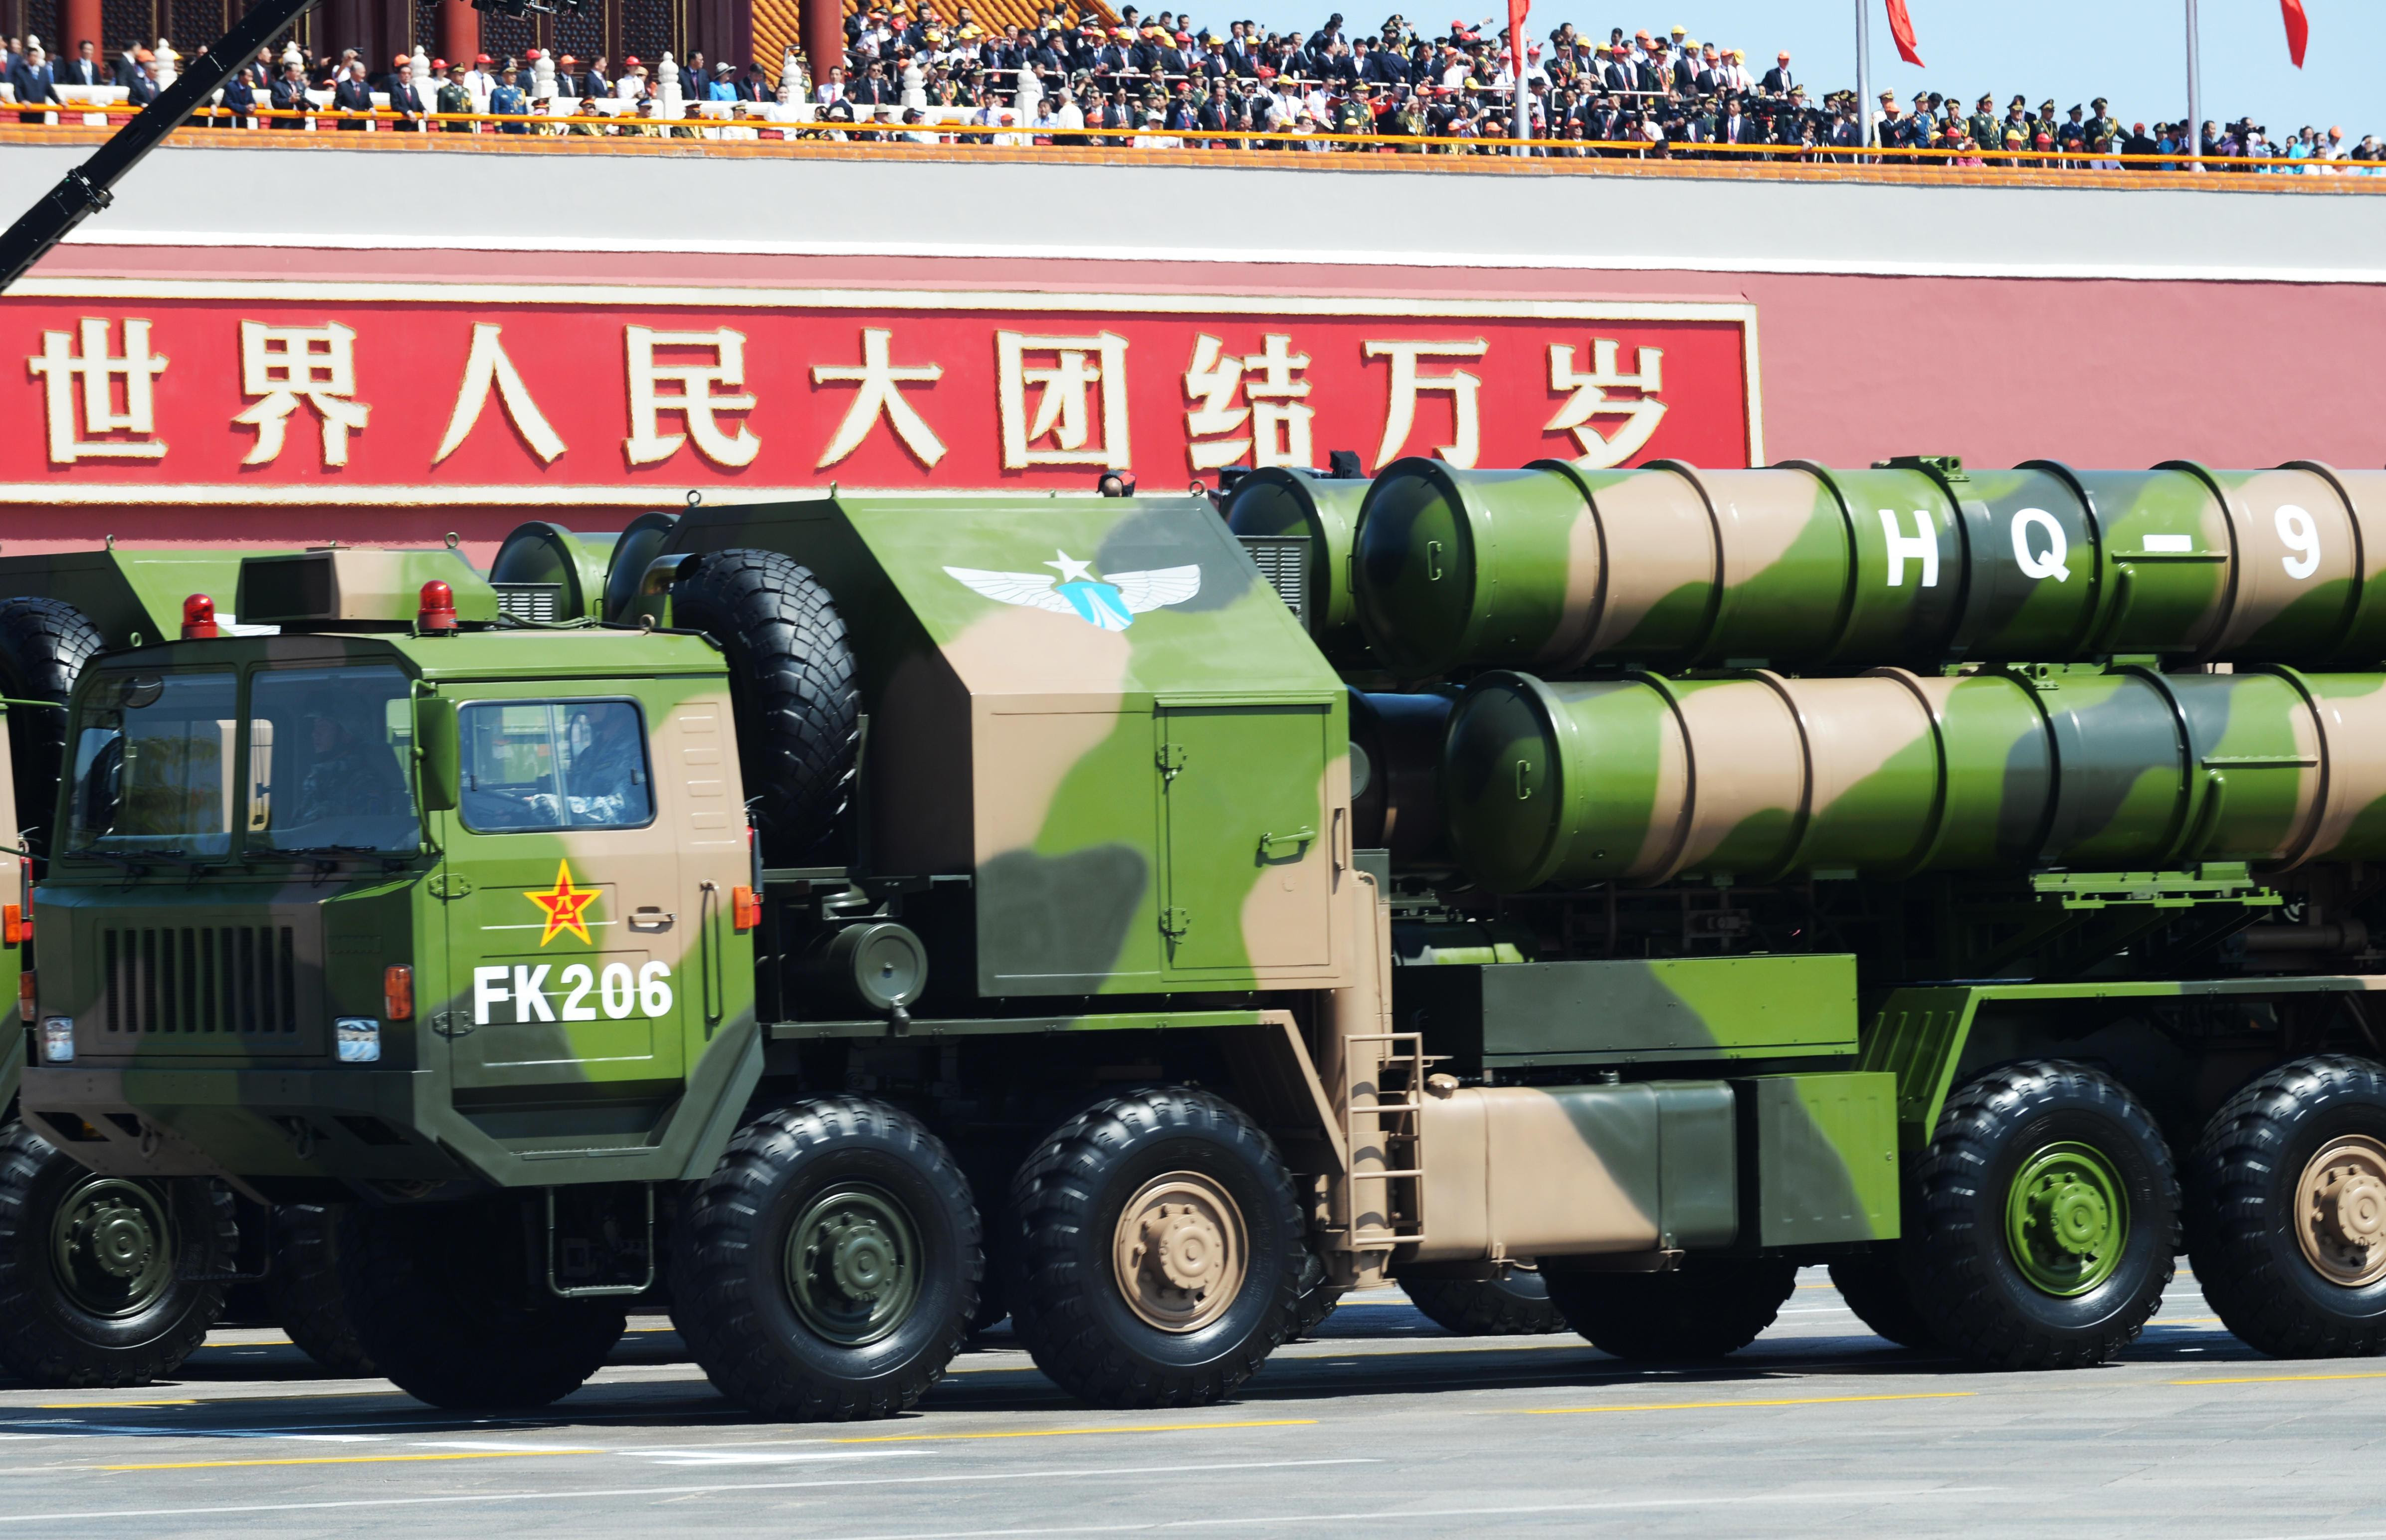 Chinese H-9 surface-to-air missile